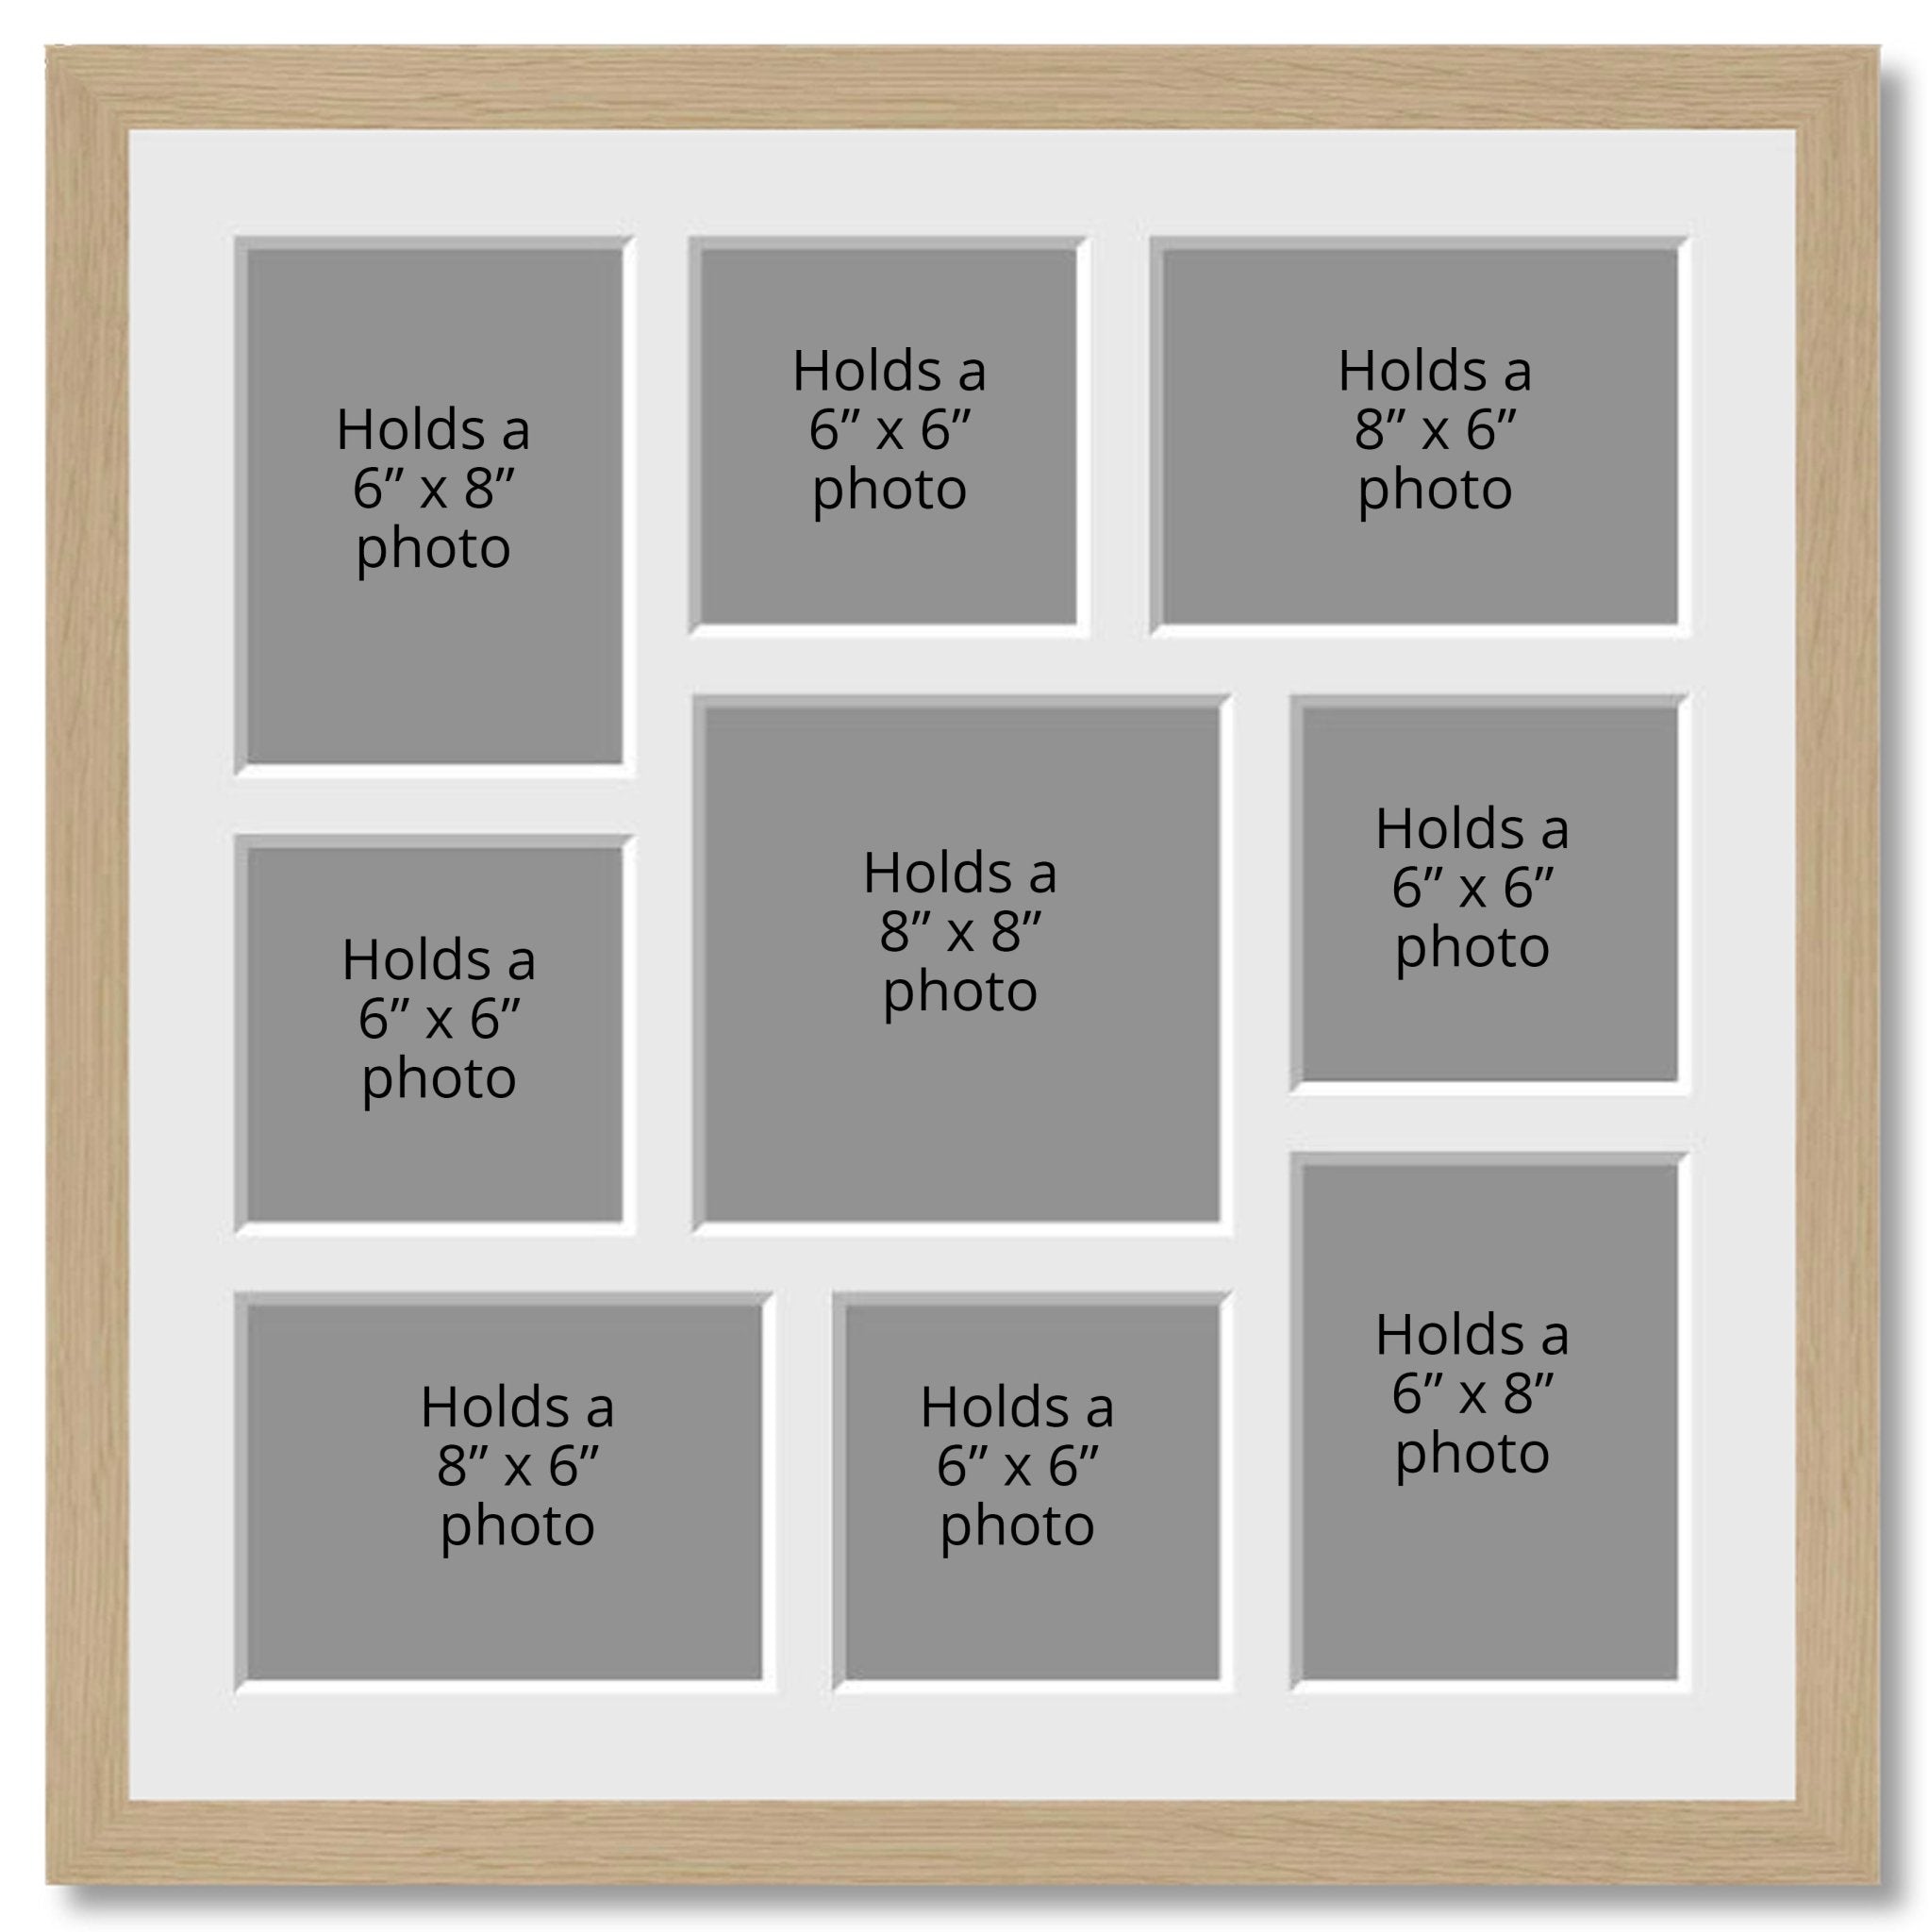 Multi Photo Picture Frame Holds 3 10x8 Photos in an Oak Veneer